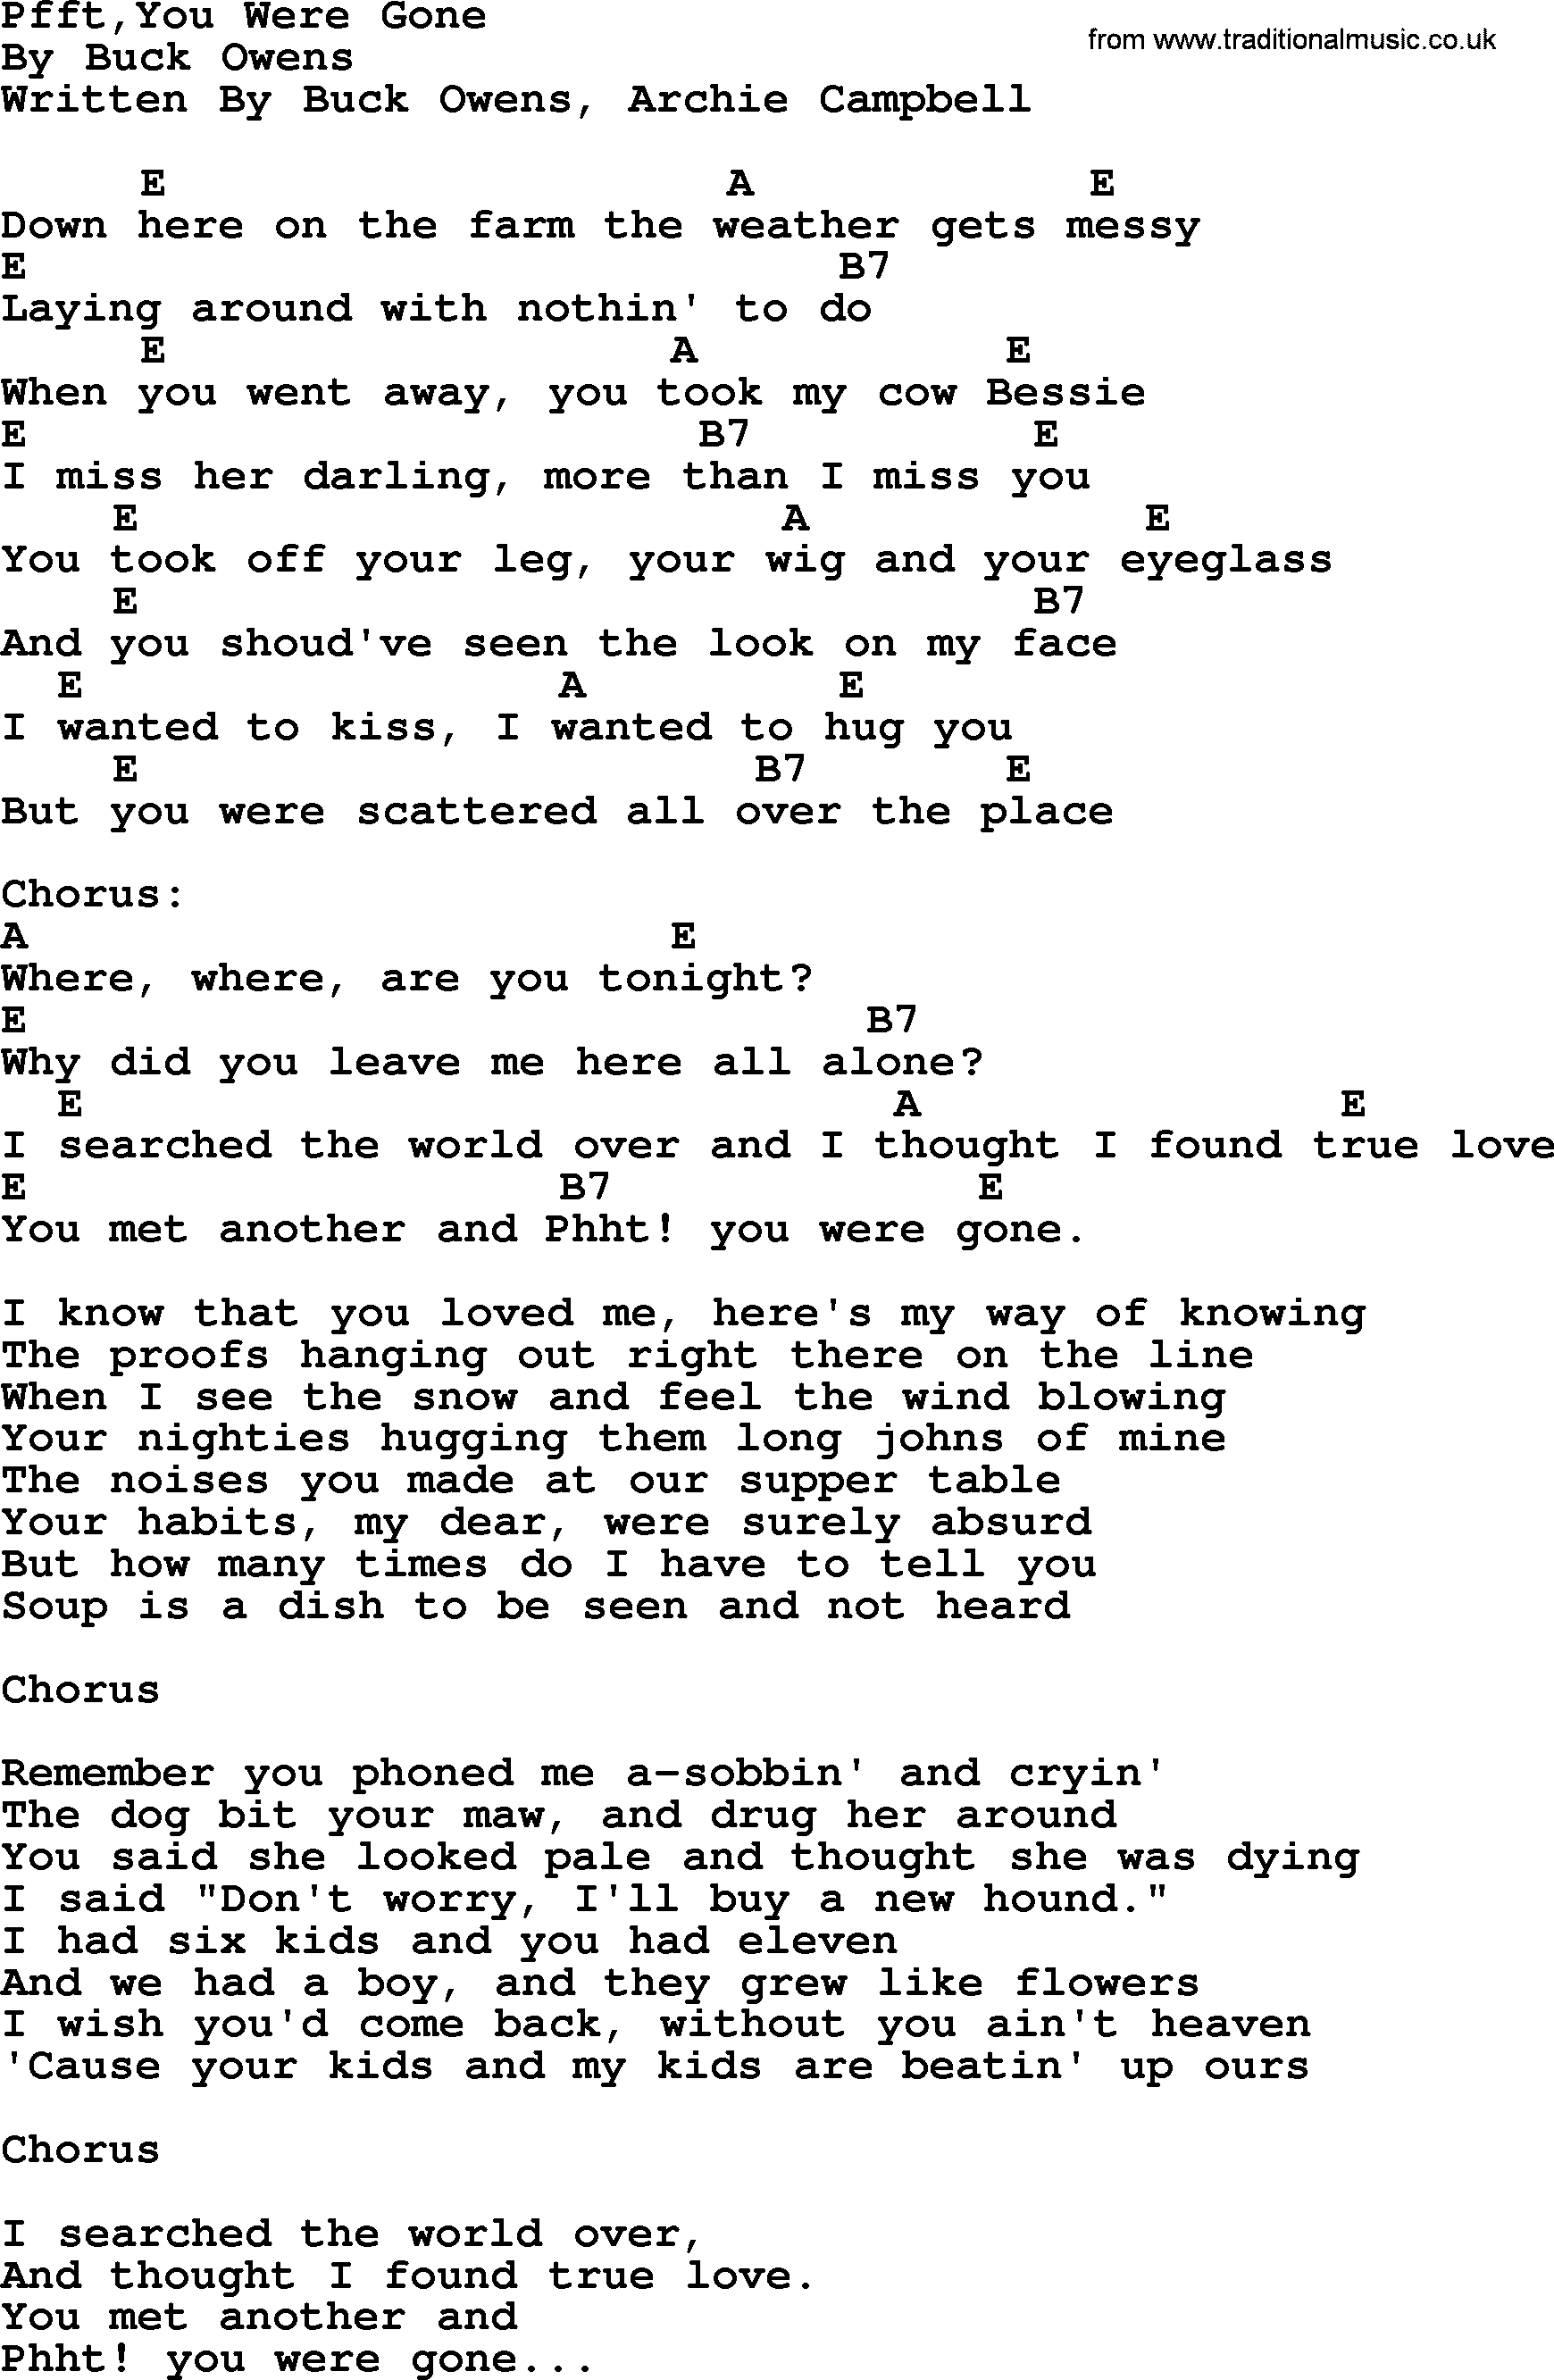 Bluegrass song: Pfft, You Were Gone, lyrics and chords